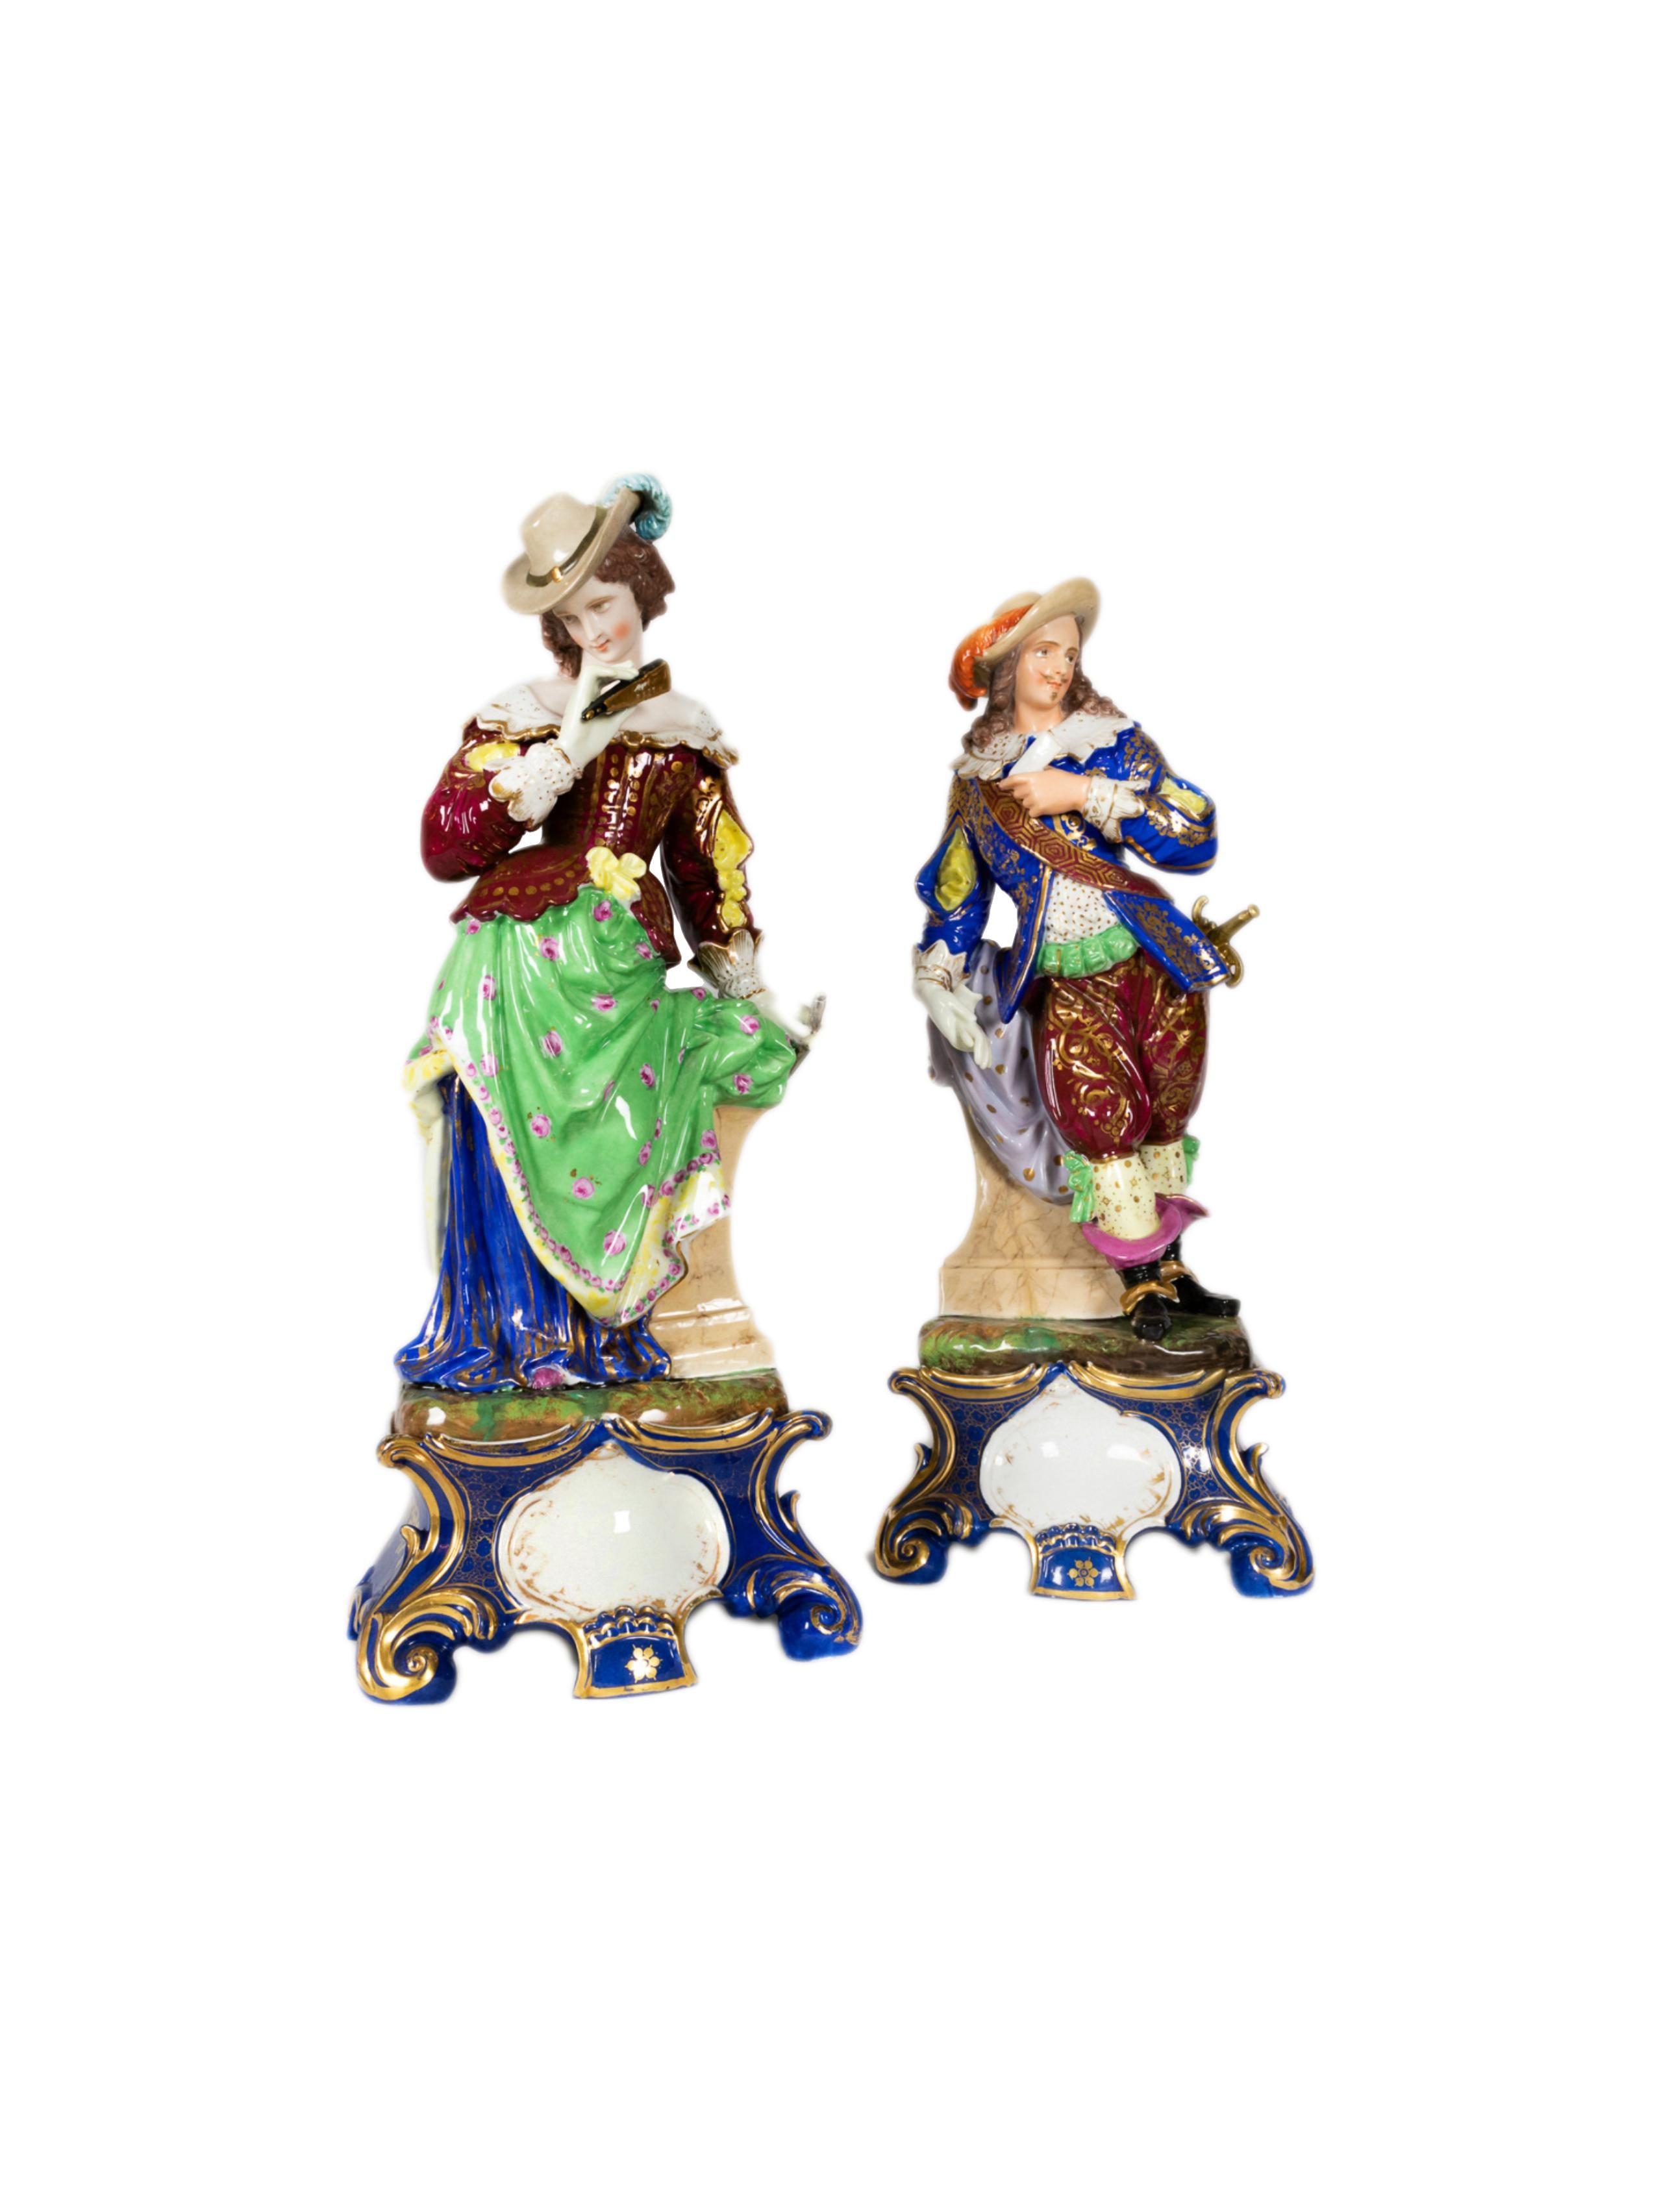 A pair of large polychrome porcelain figurines of a musketeer his beloved lady with a fan in hand, dressed in the style of the 18th century with a removable porcelain base.
Dimensions: Height 60 cm Length 25 cm Width 20 cm
Style: Baroque
Period: